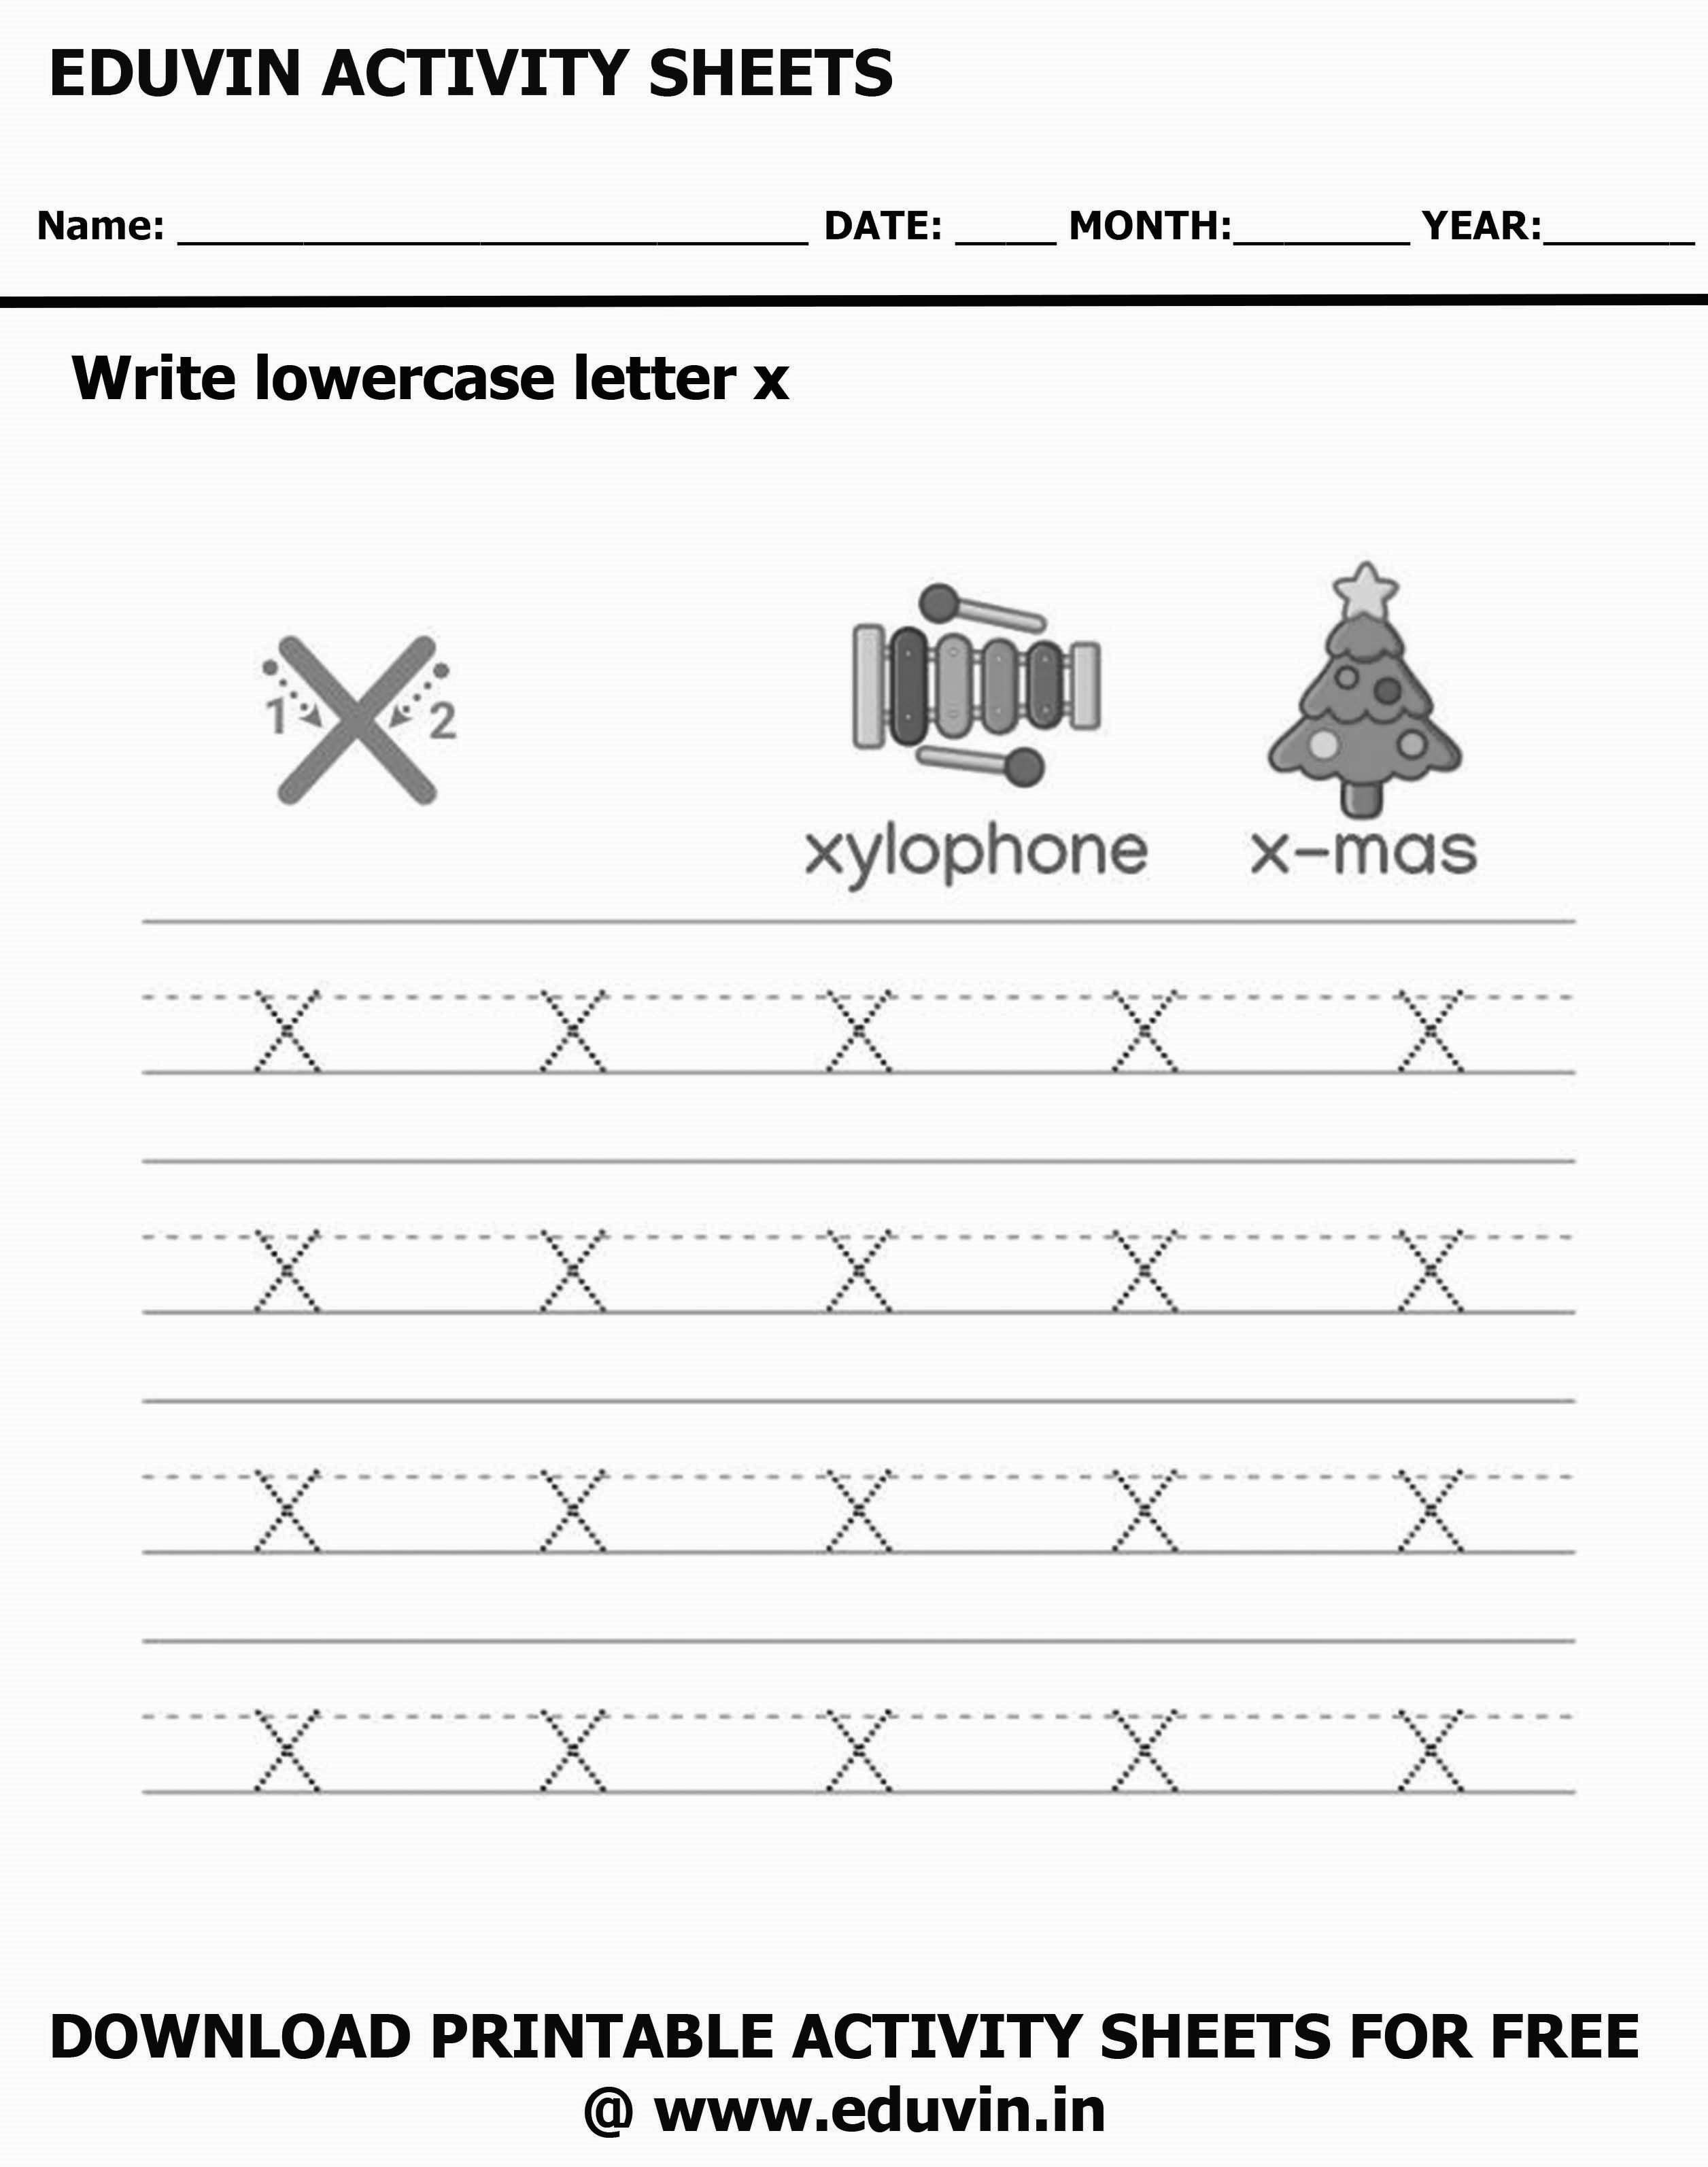 Lowercase Alphabet x Worksheets | Letter x Trace and Write Activity Sheet For Tracing and Letter Writing For Kids